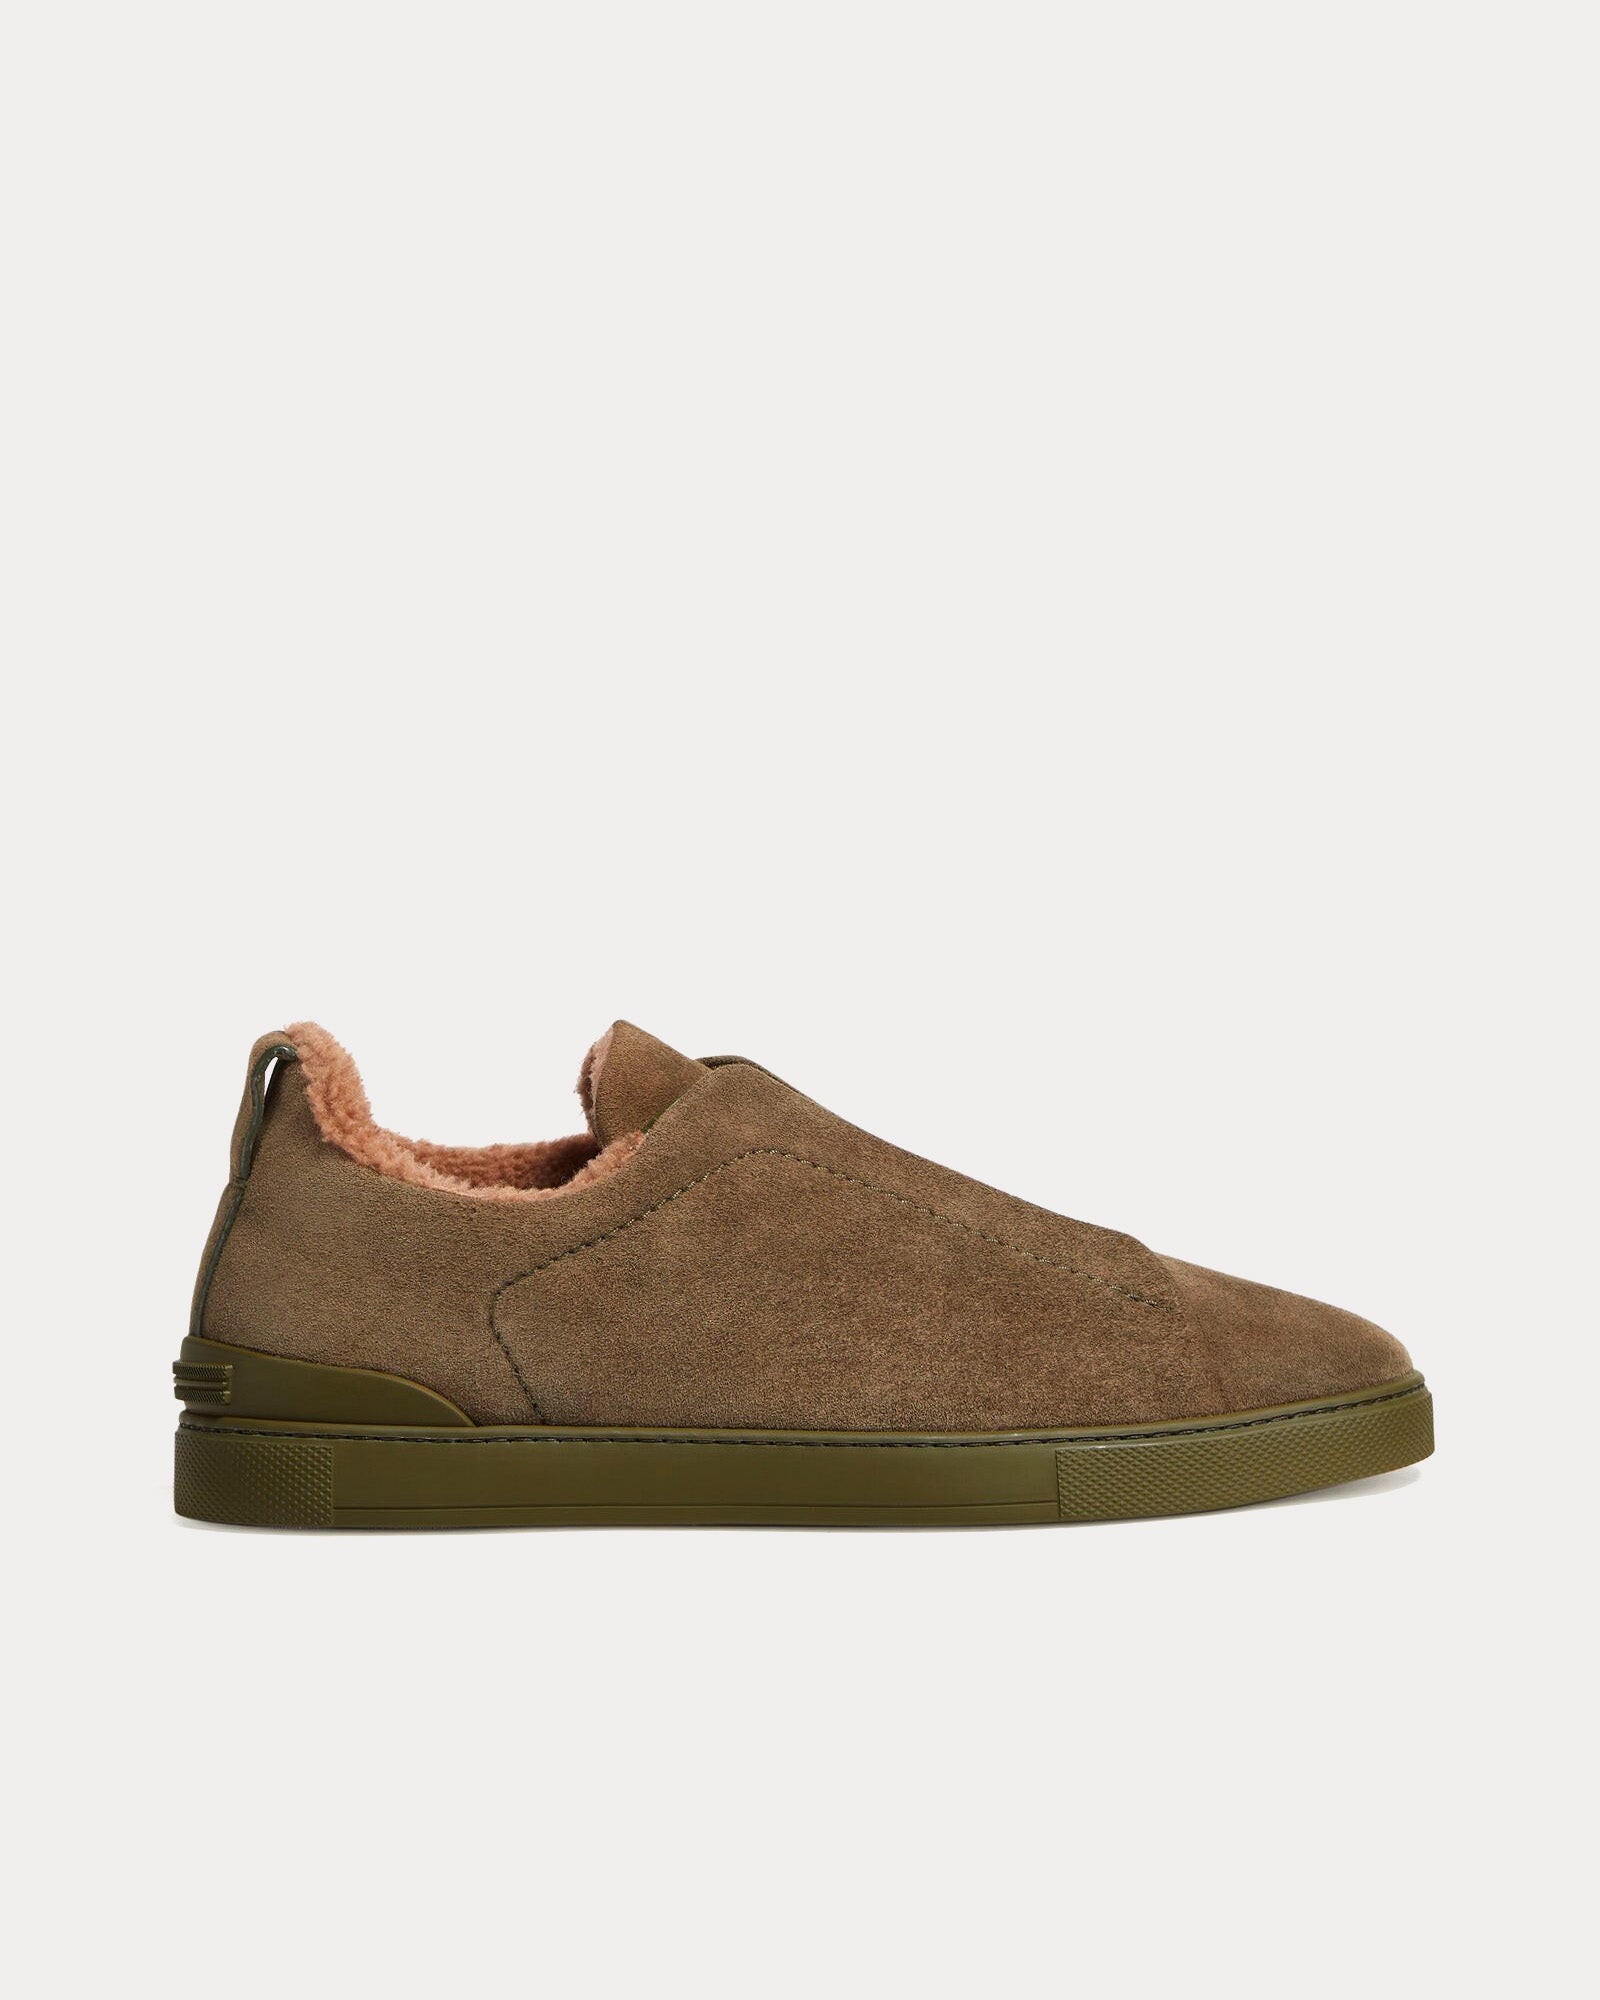 Zegna - Triple Stitch Suede & Shearling Olive Green Slip On Sneakers